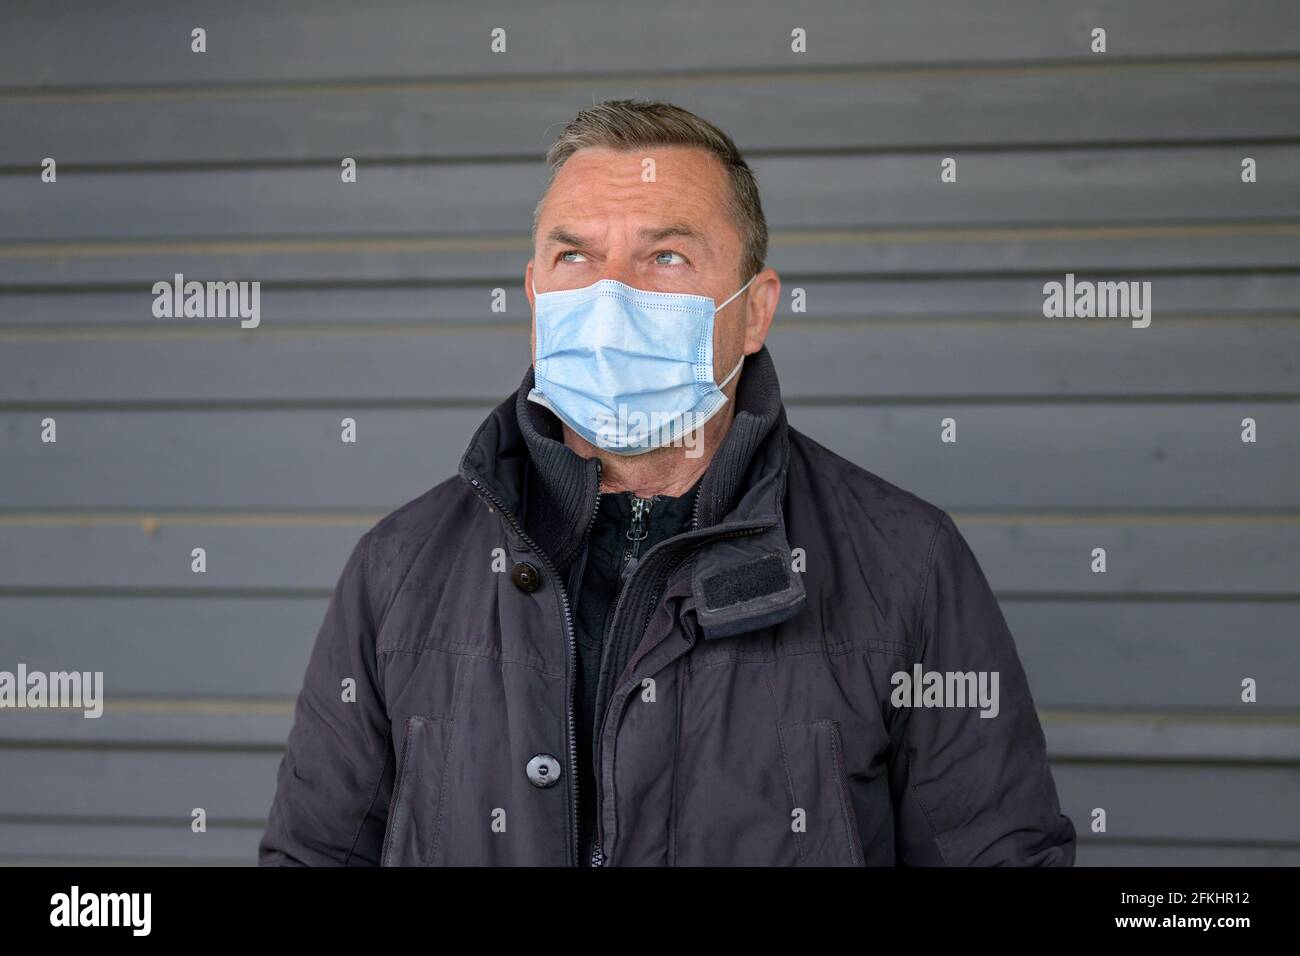 Thoughtful man wearing a protective face mask glancing to the side with a thoughtful expression as he poses outdoors against a grey wall during the Co Stock Photo